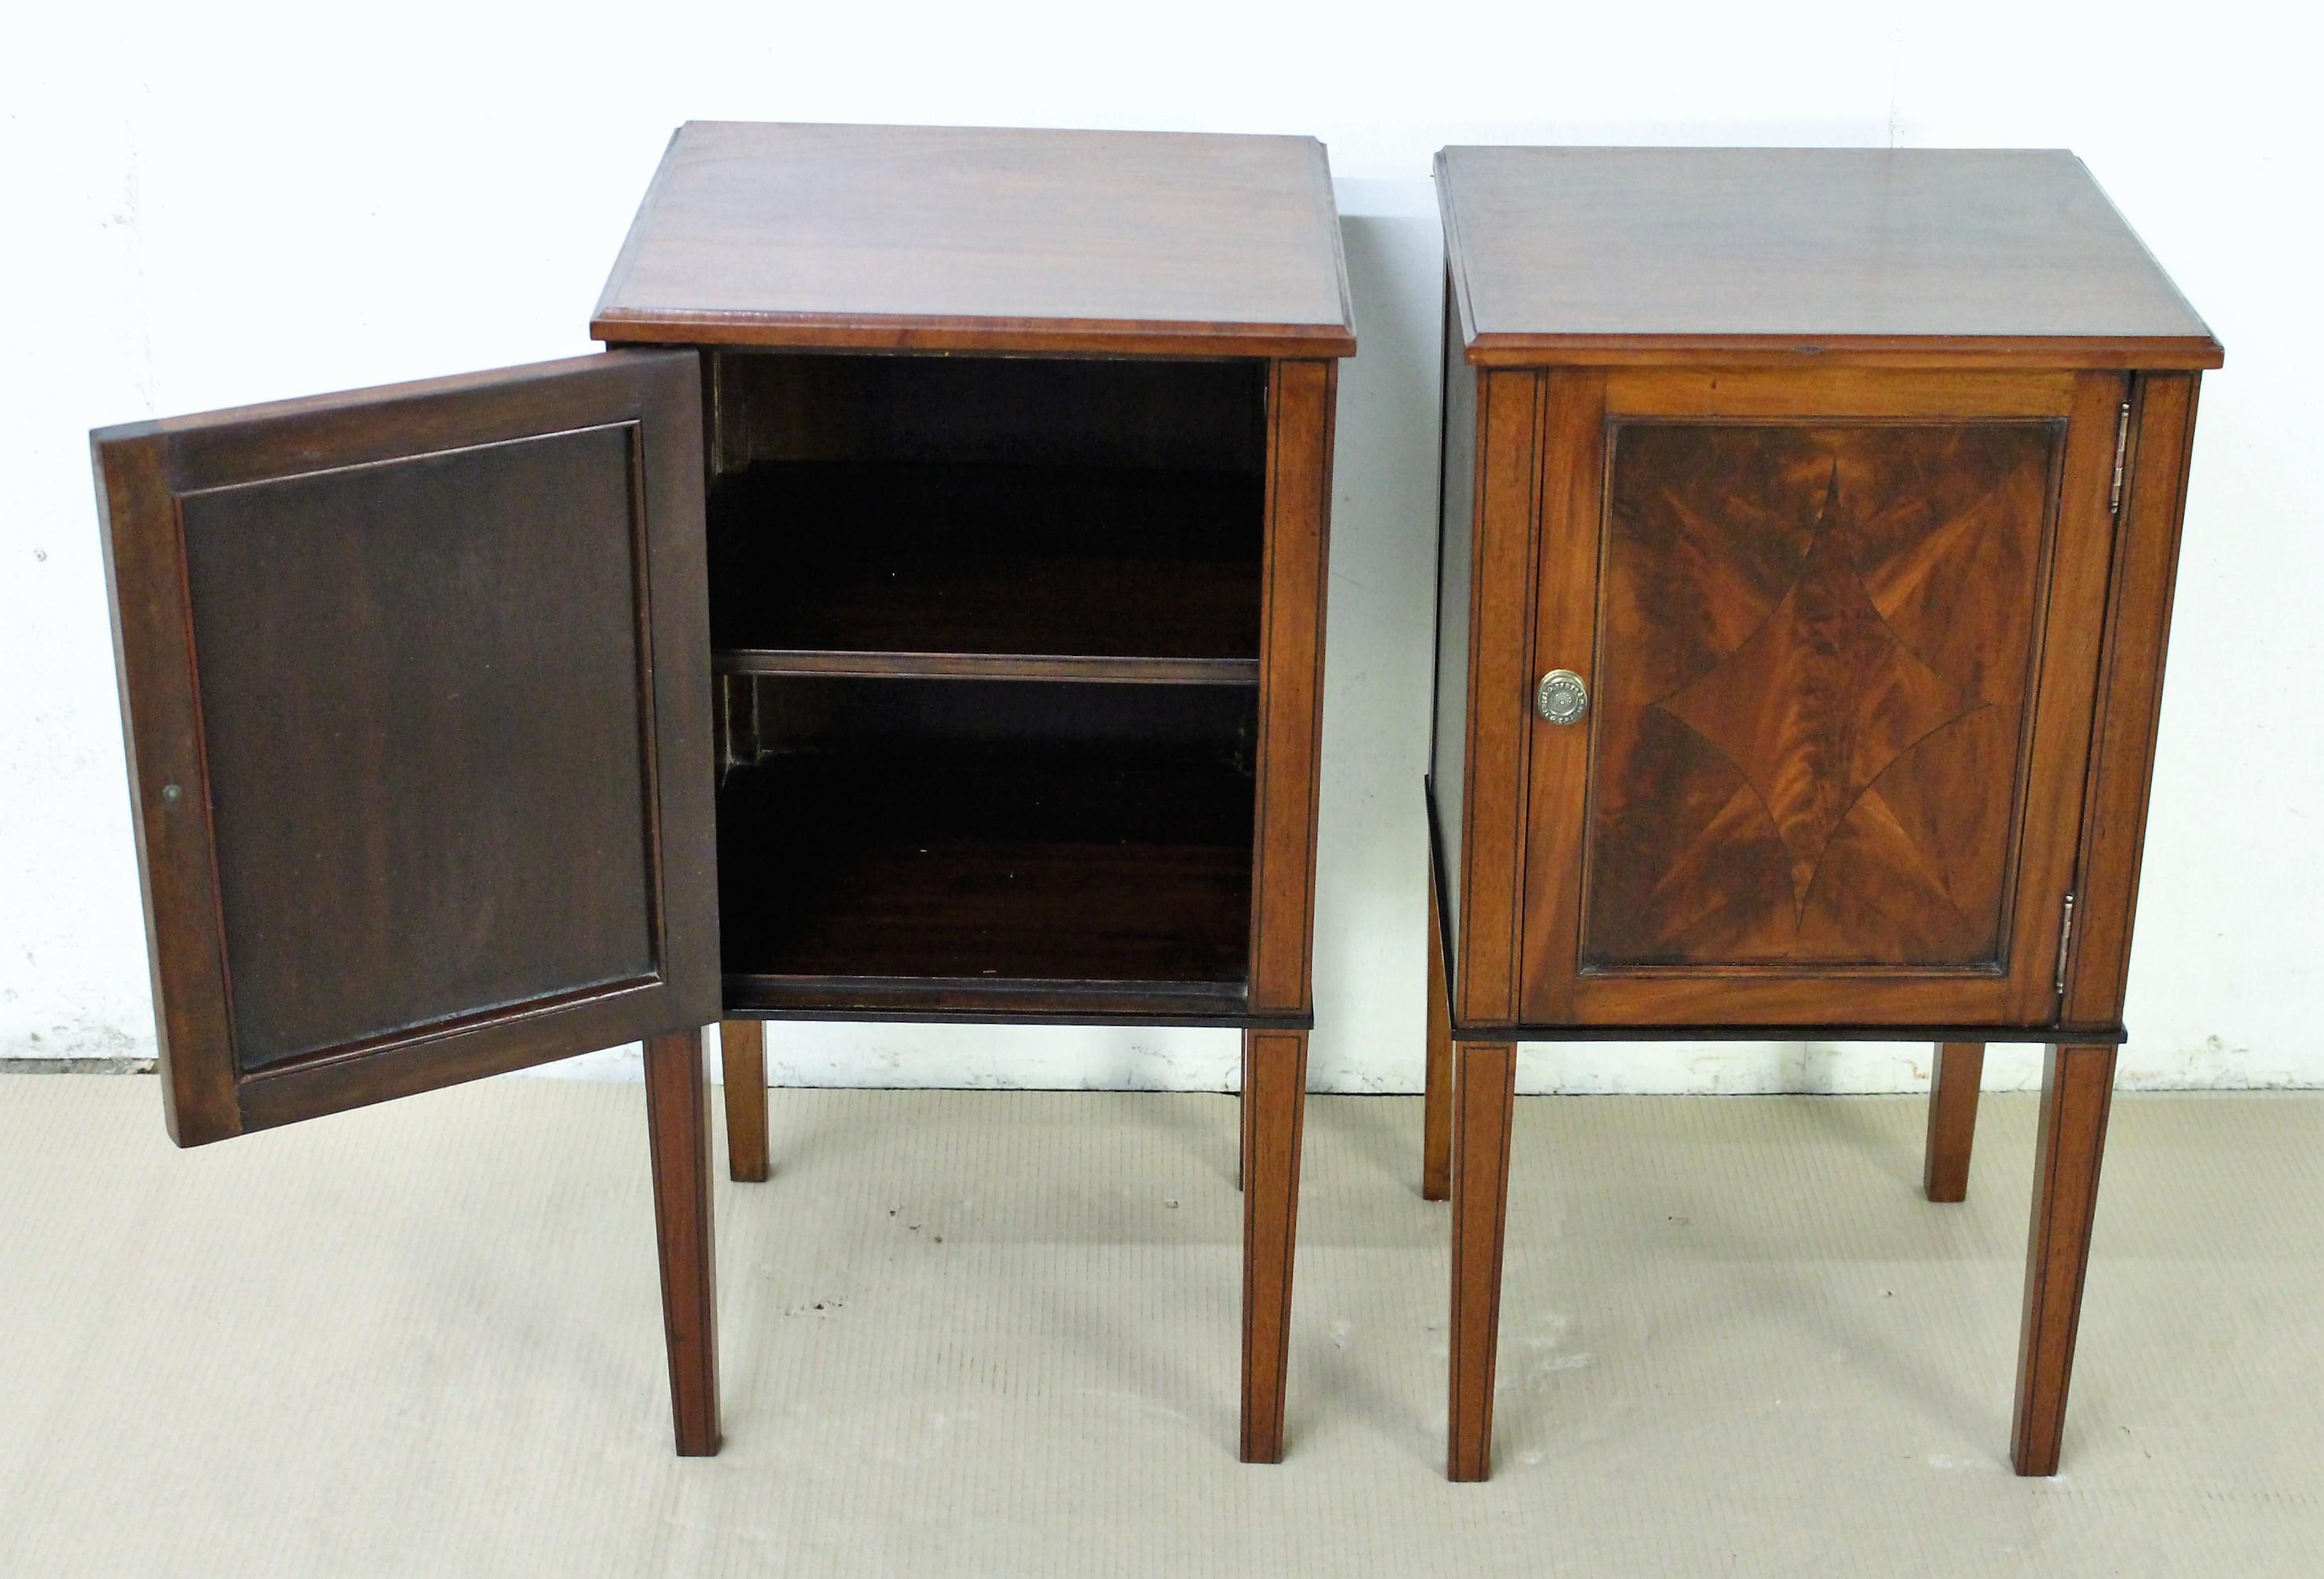 Pair of Edwardian Inlaid Mahogany Bedside Cupboards 1